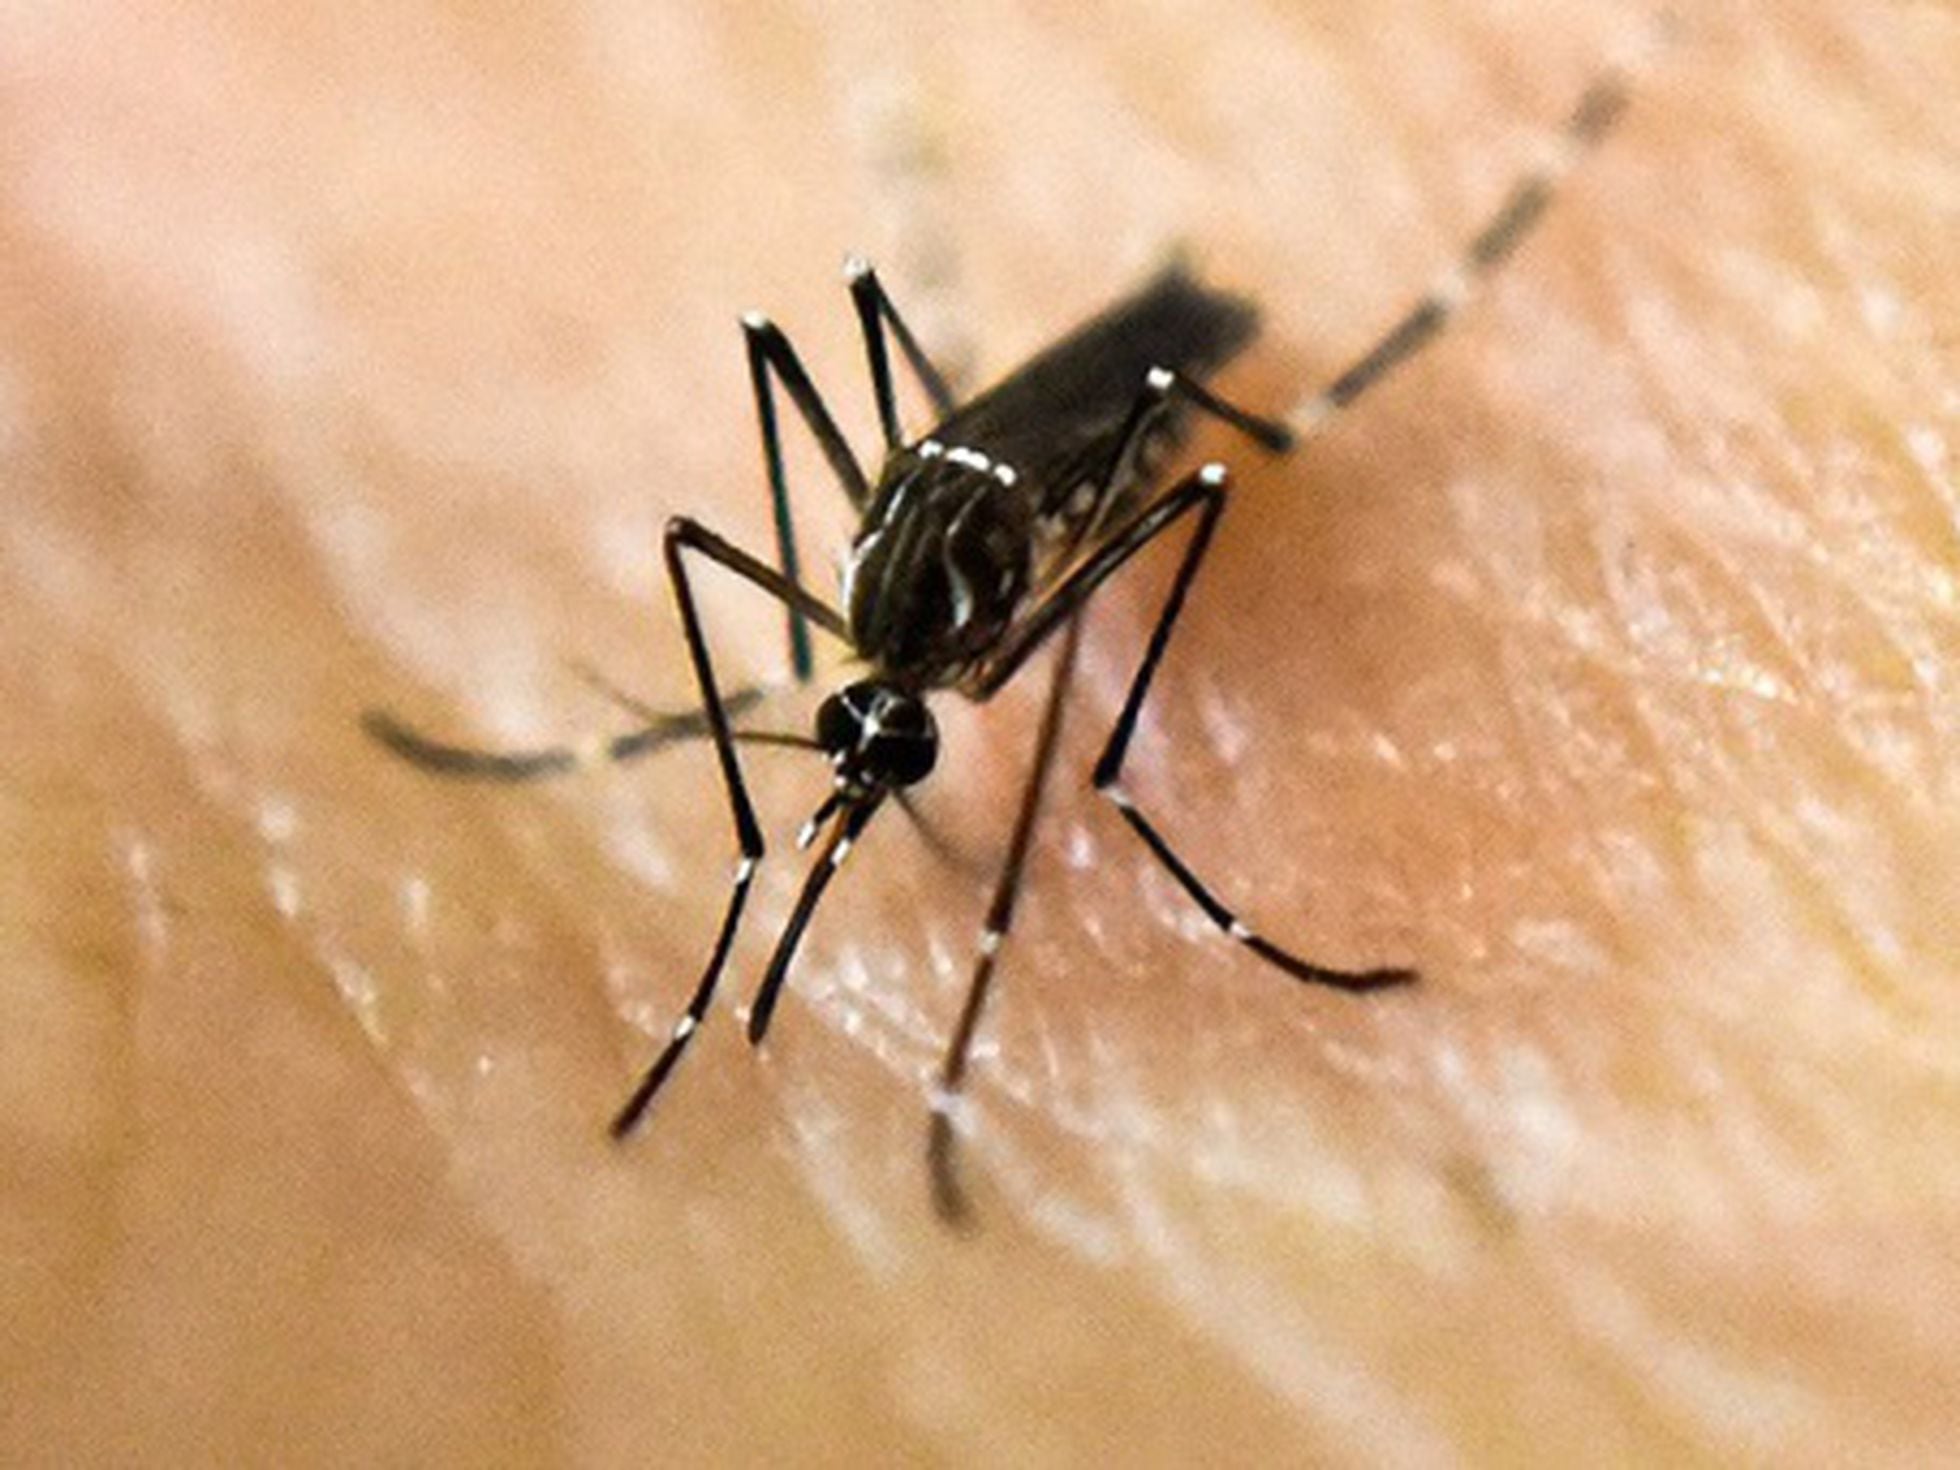 Why do mosquitoes bite some people more than others? | Science & Tech | EL  PAÍS English Edition